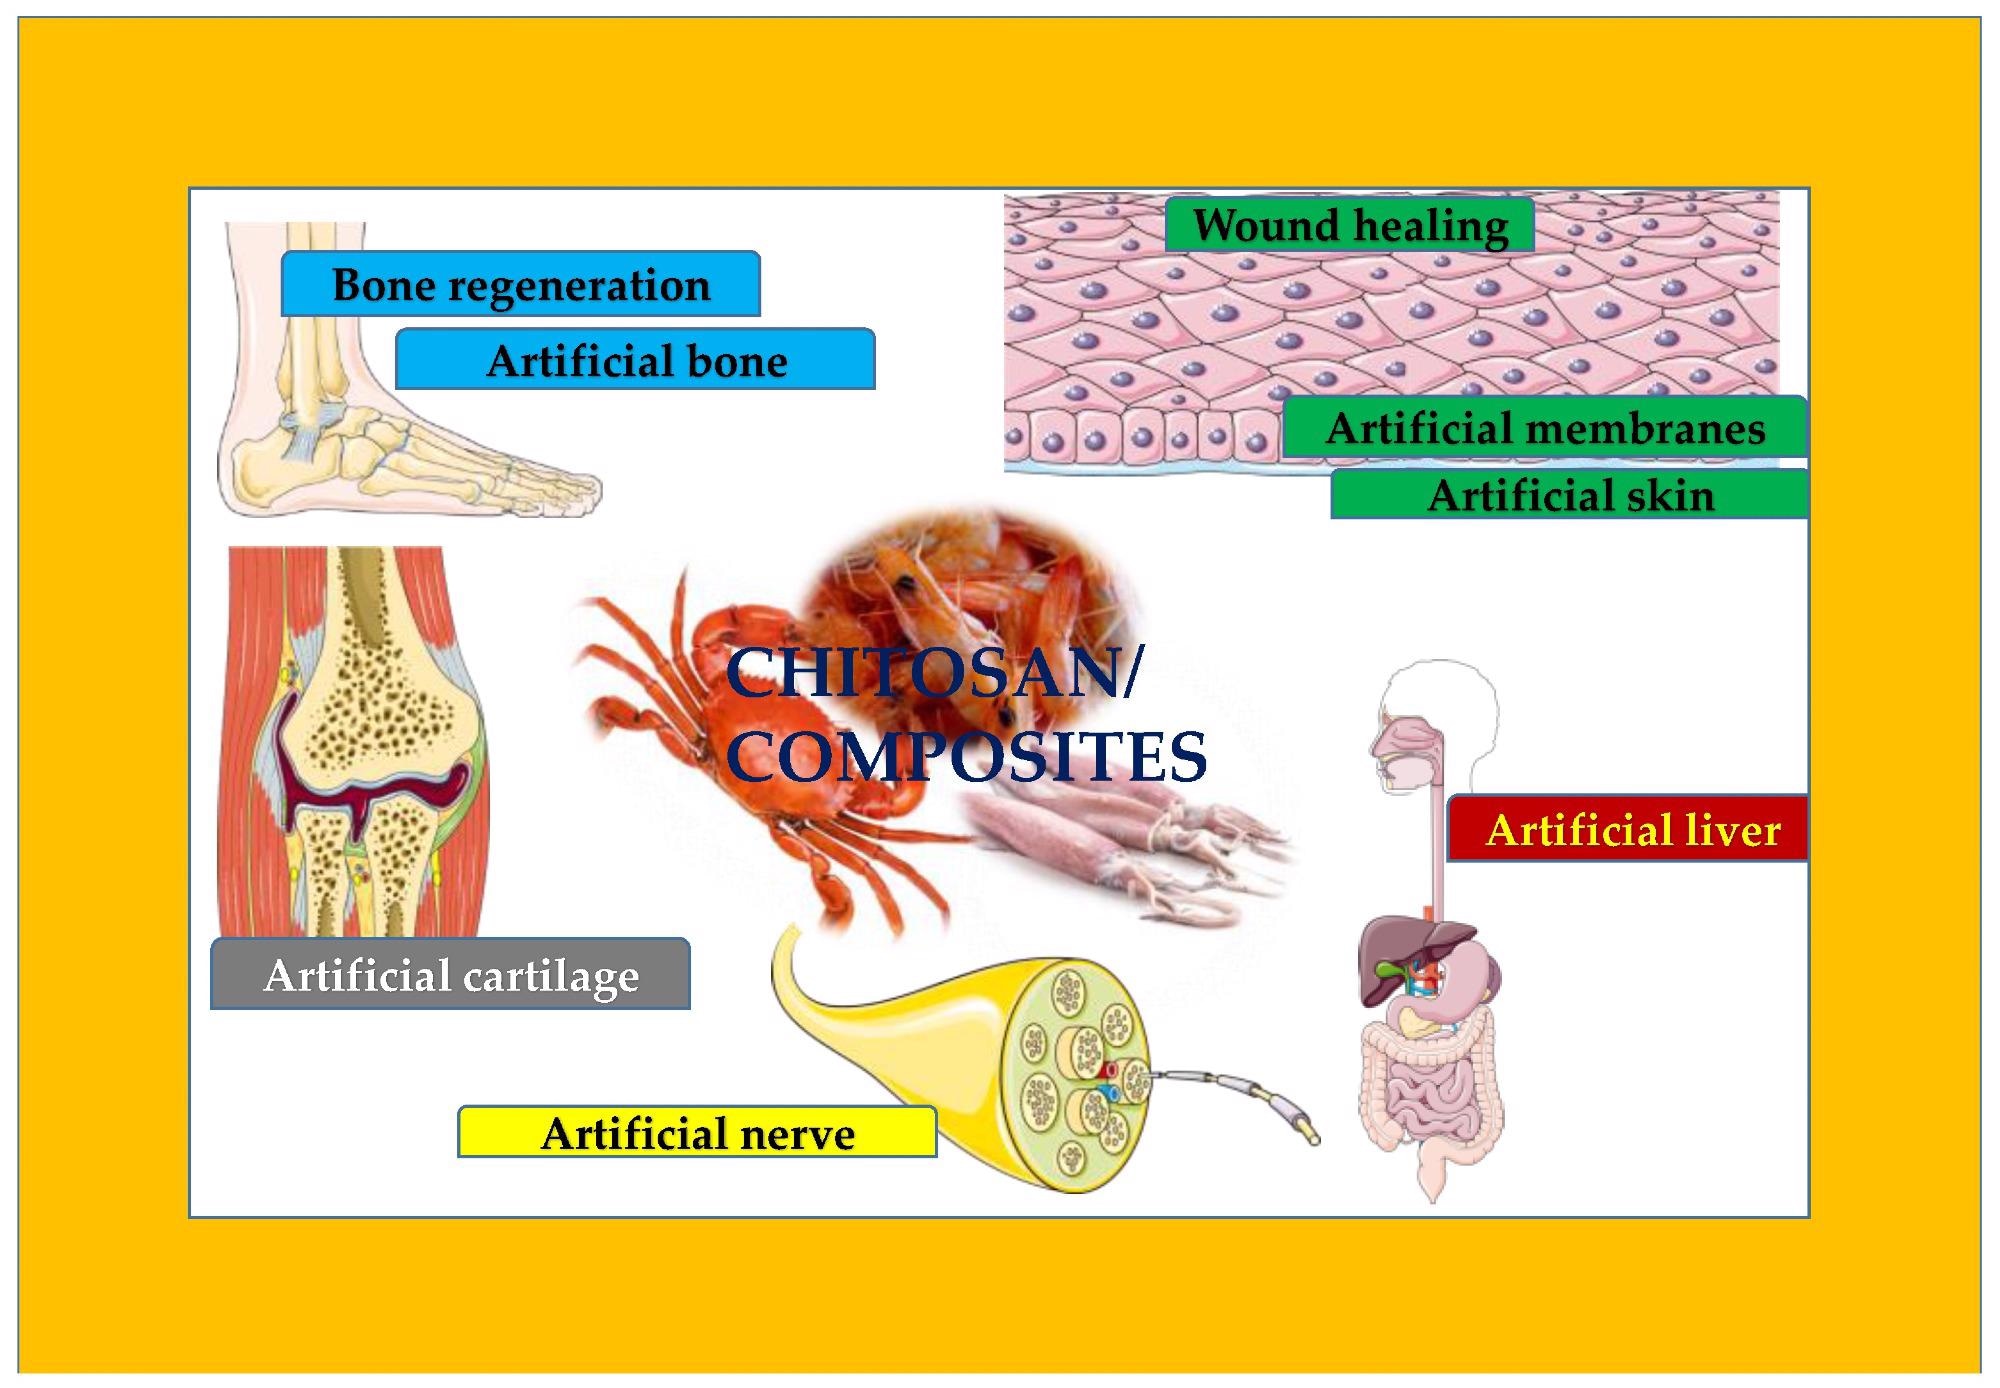 Overview of the areas impacted by chitosan and its composites.